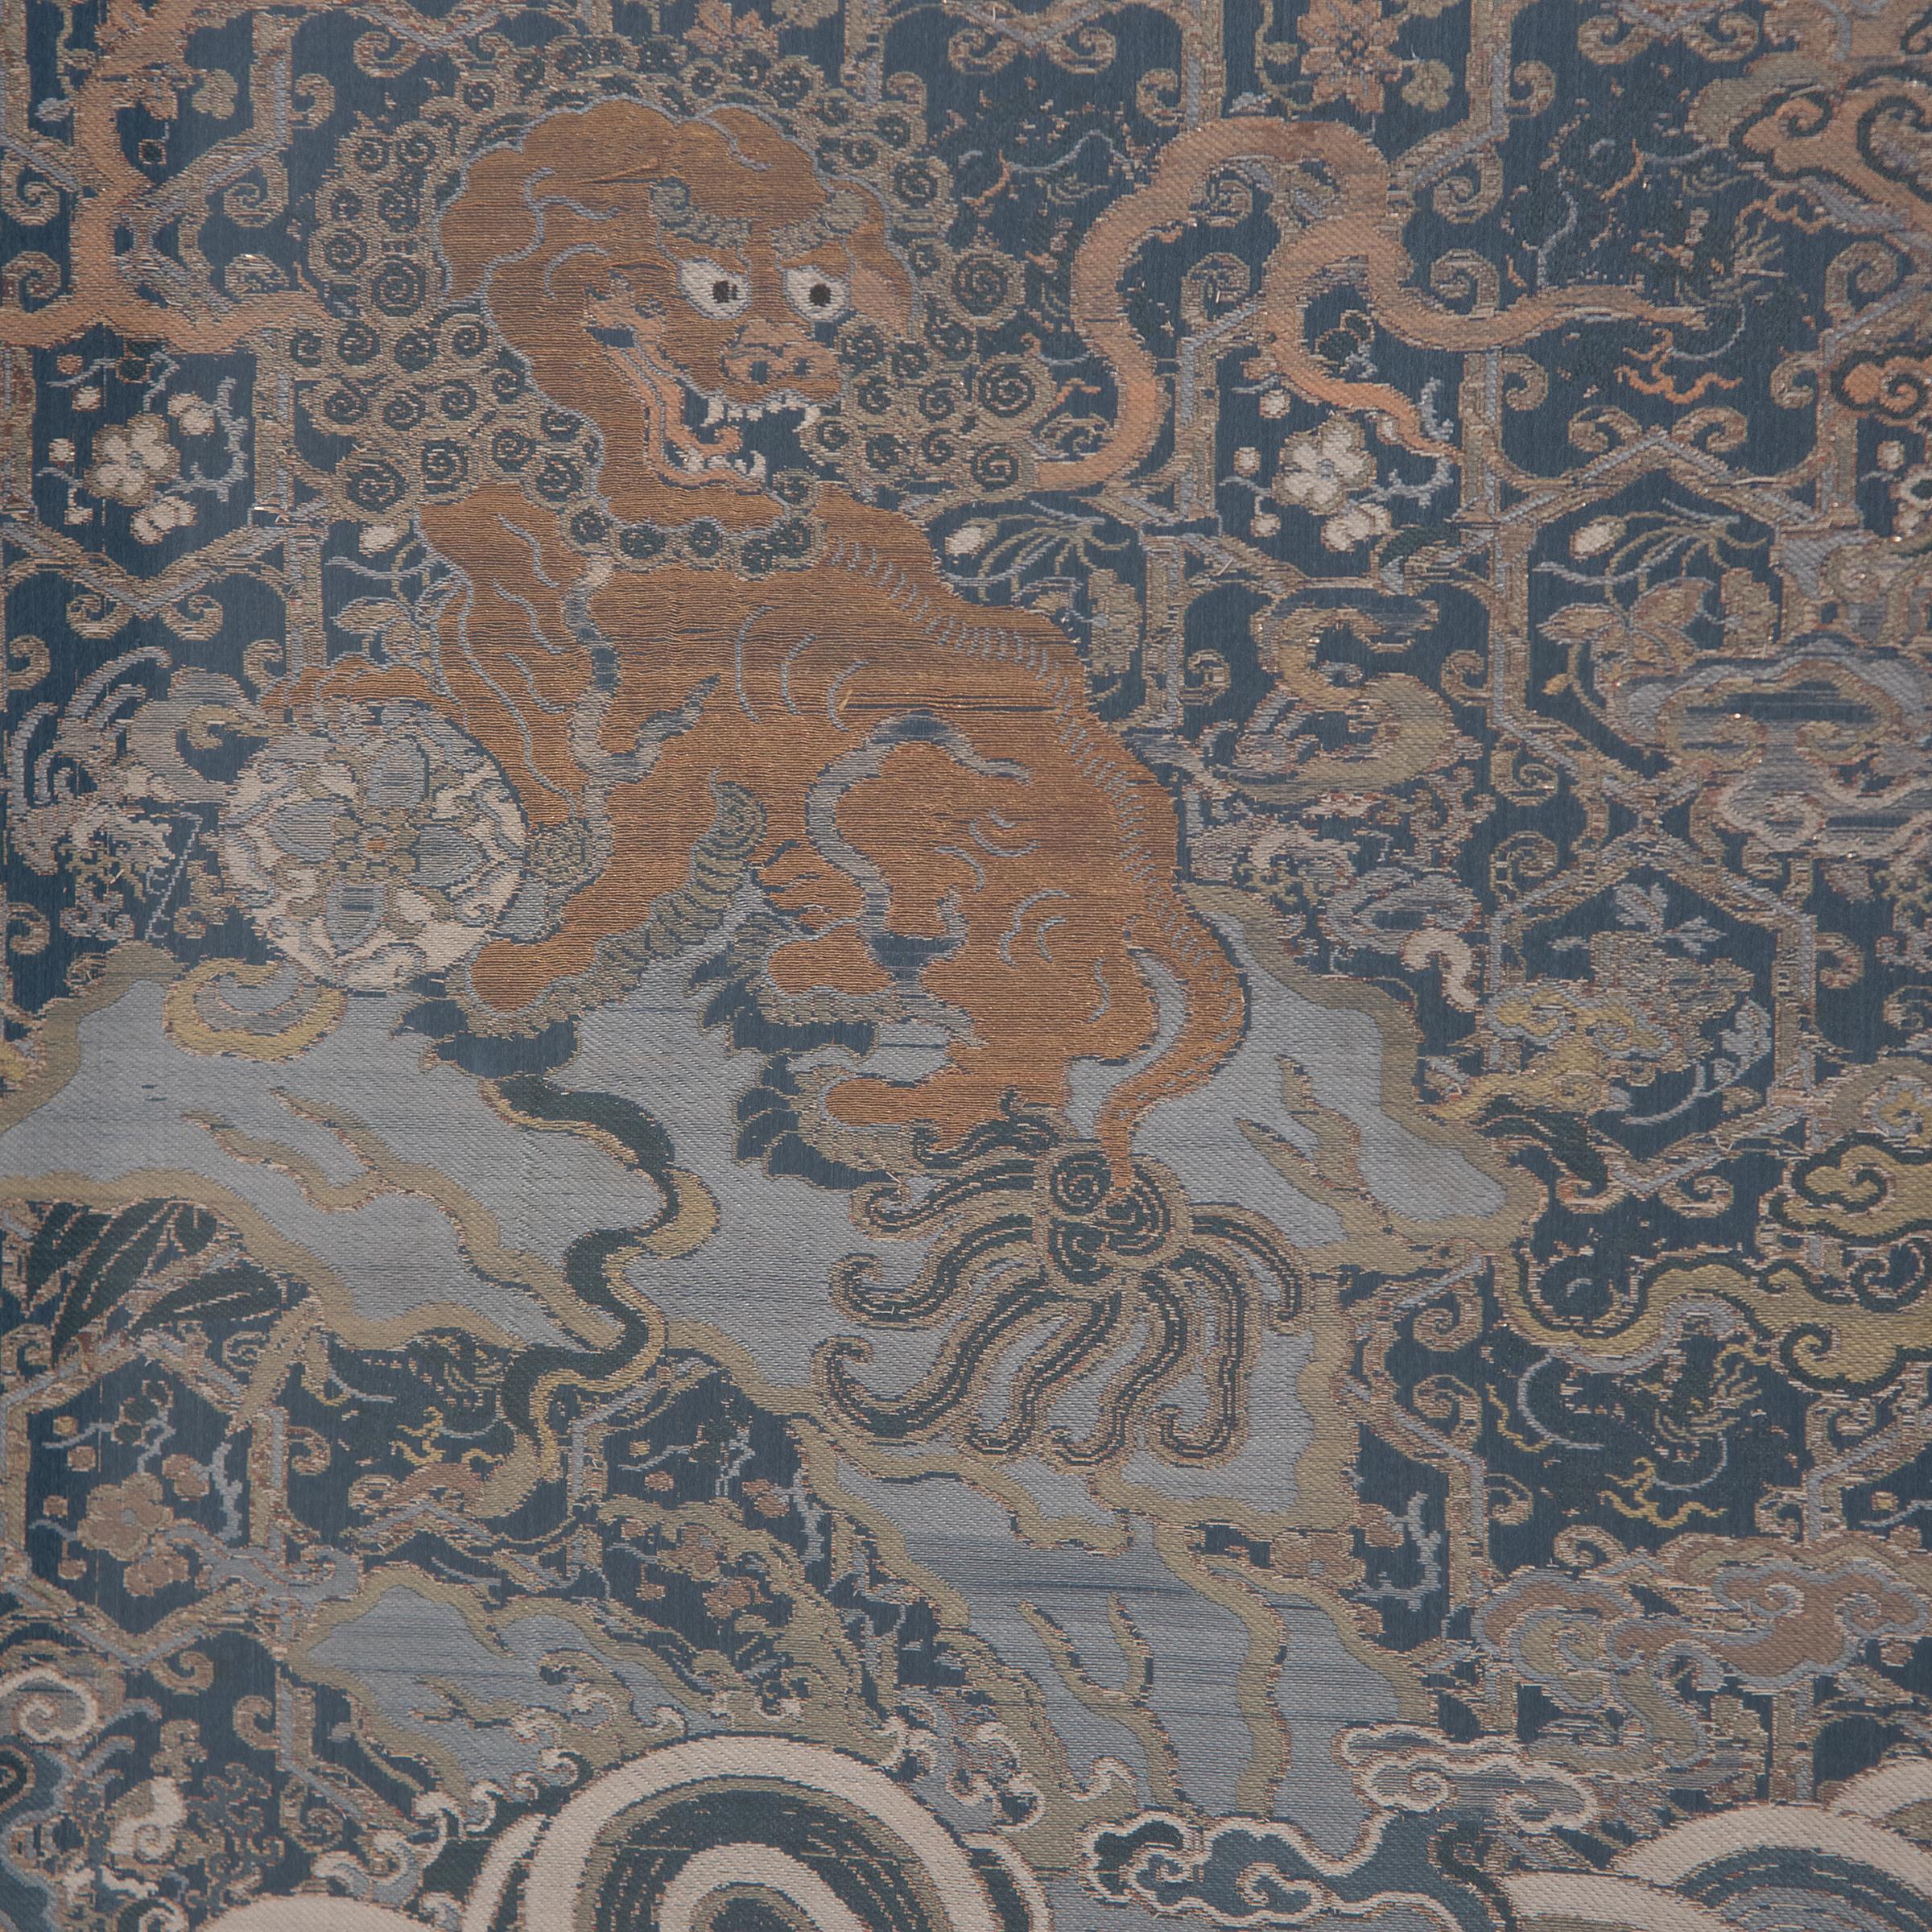 Pair of Framed Chinese Silk Brocade Chair Panels, c. 1850 For Sale 1